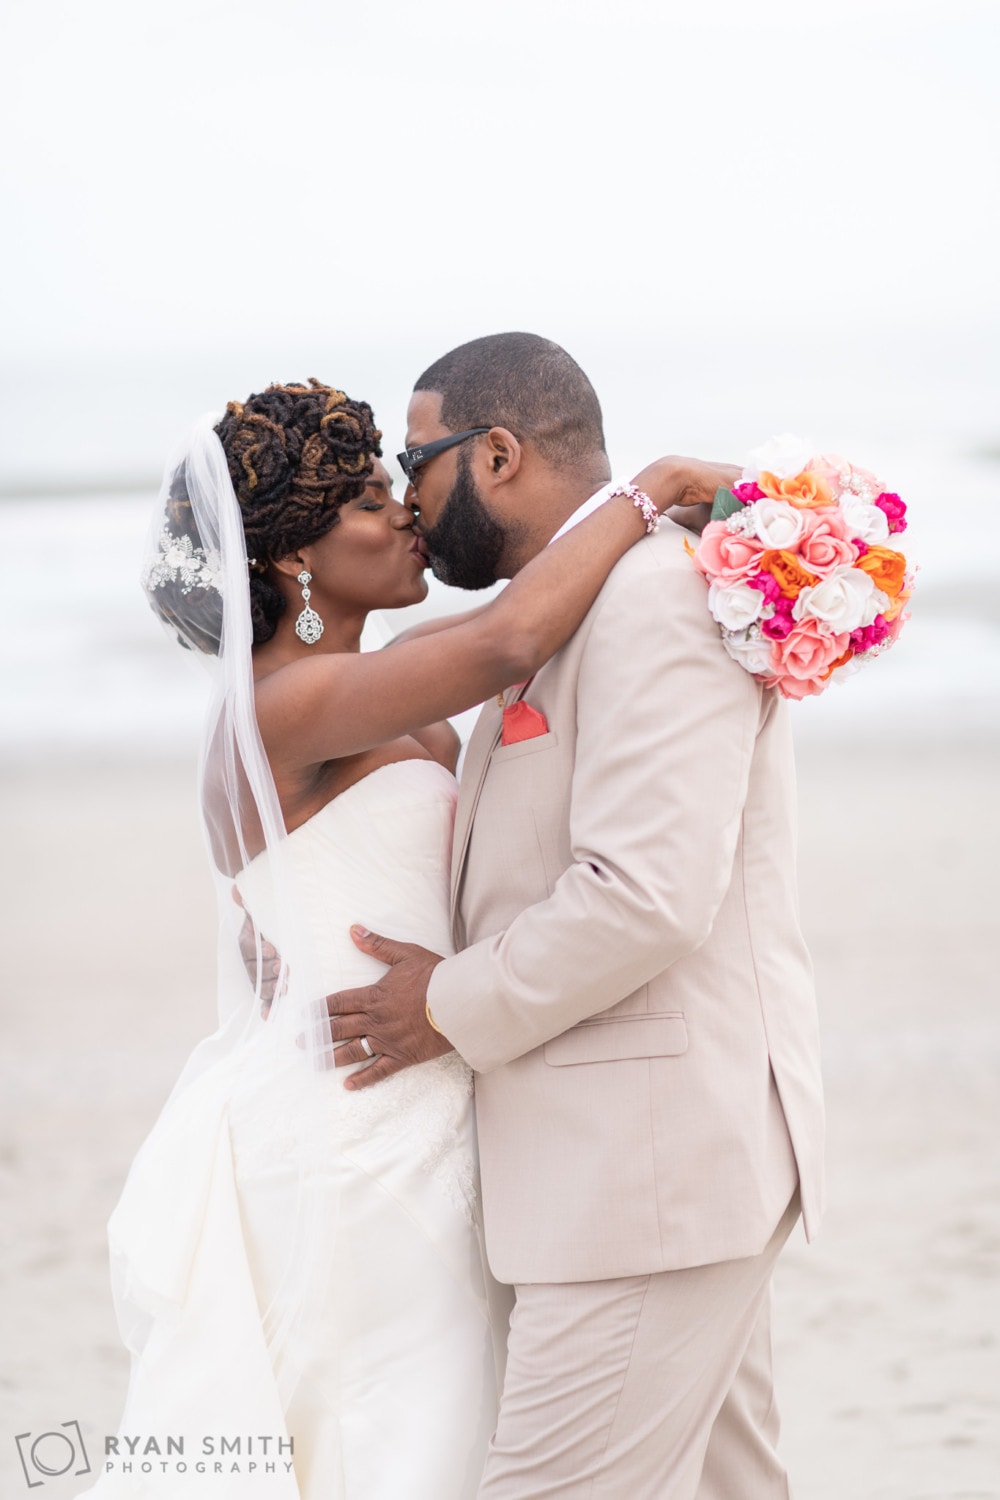 Bride kissing groom with flowers around his neck - Doubletree Resort - Myrtle Beach